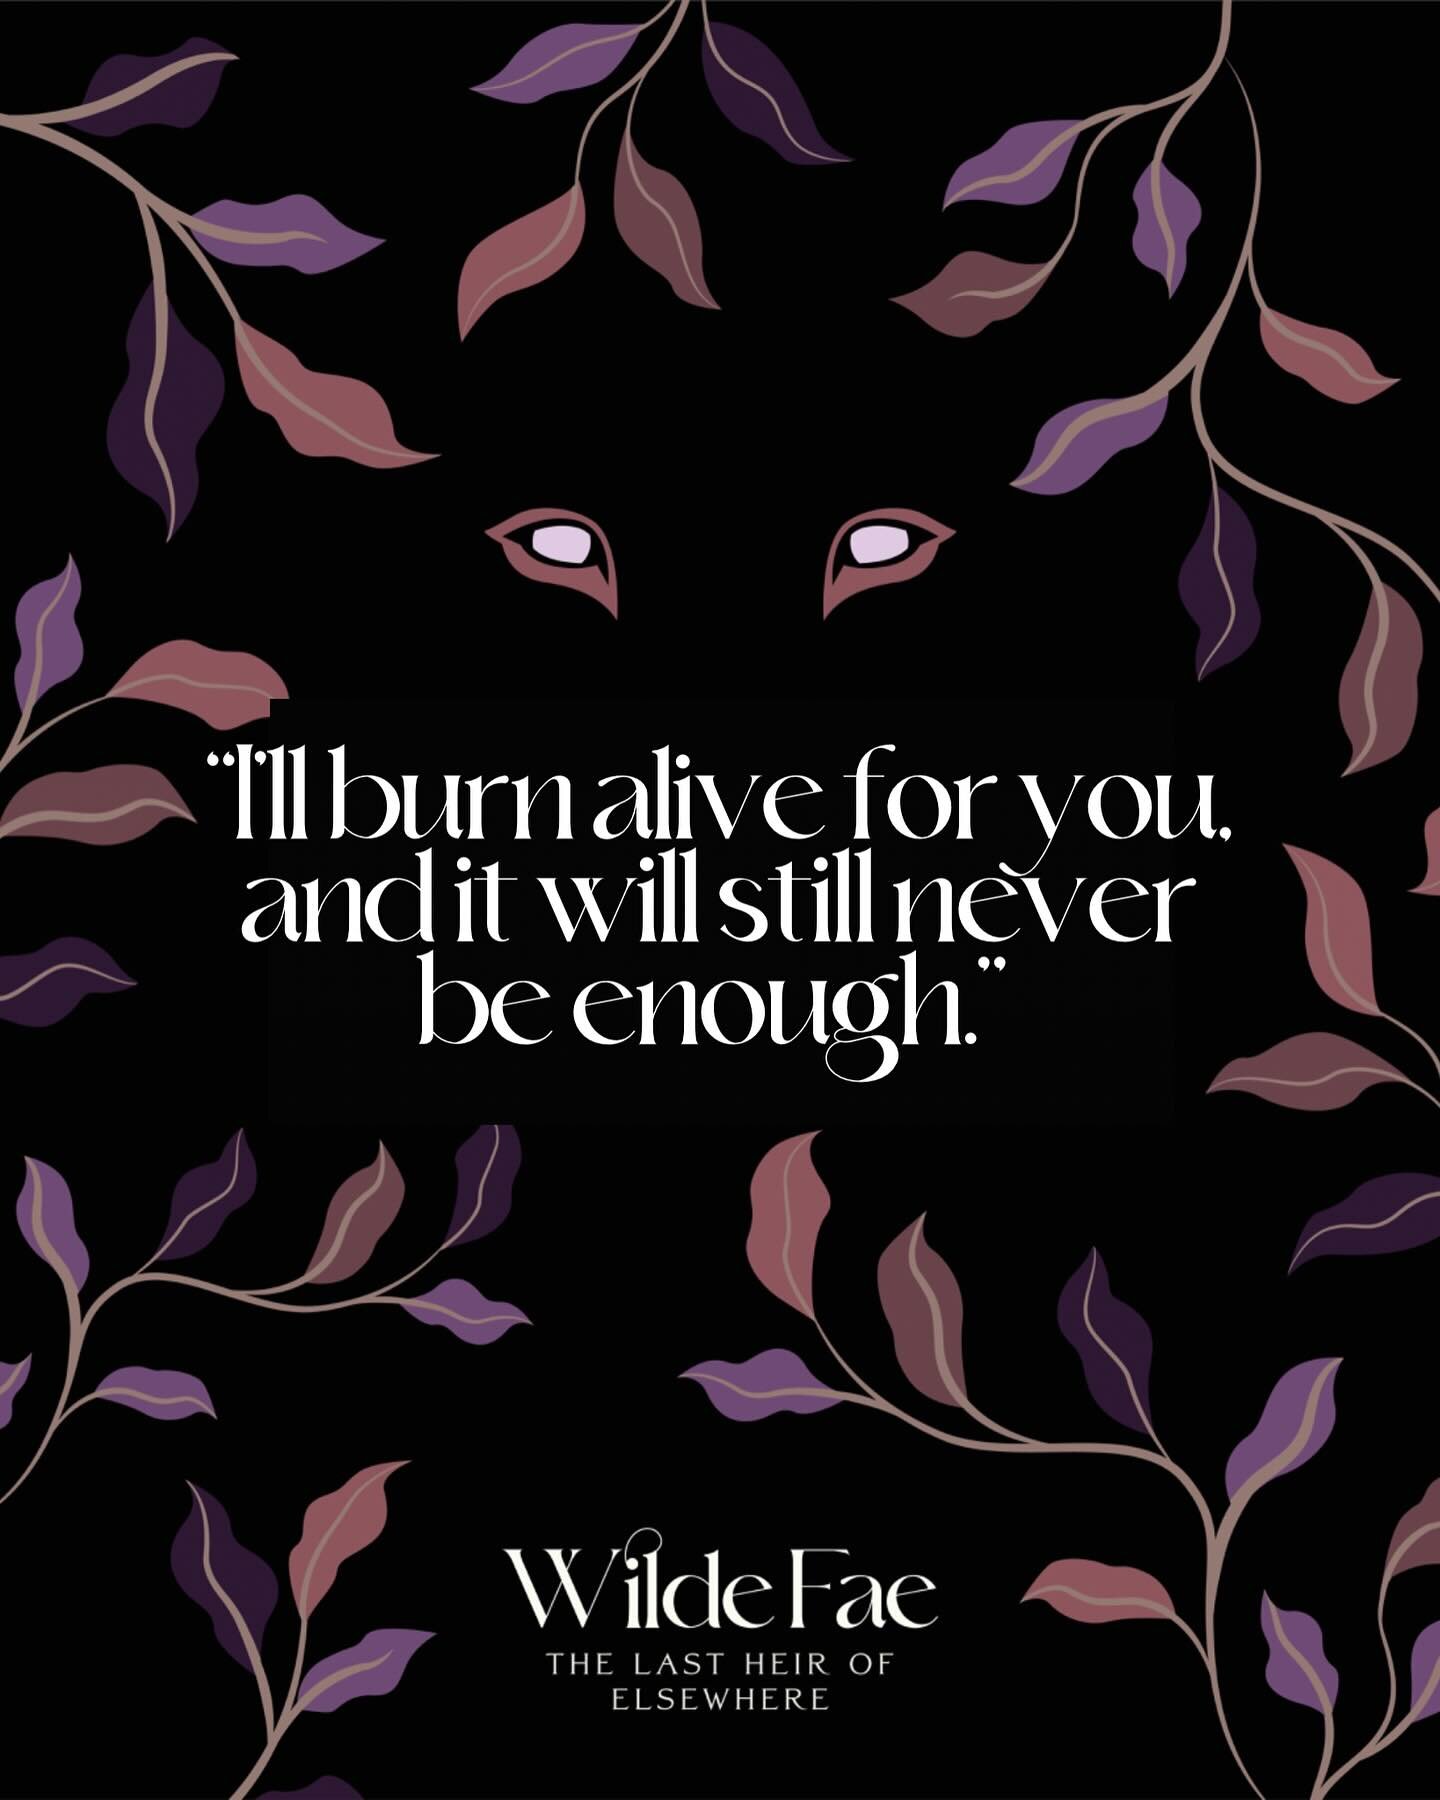 BOOK HERE👉🏻 Wilde Fae: The Last Heir Of Elsewhere by Kate King

👉🏻HERE is a teaser quote from Book 3. 👀 AND 

✨TOMORROW, February 16th will be the cover reveal 💜✨

Can&rsquo;t wait to share it with all of you. 

Perfect for fans of A Court of T